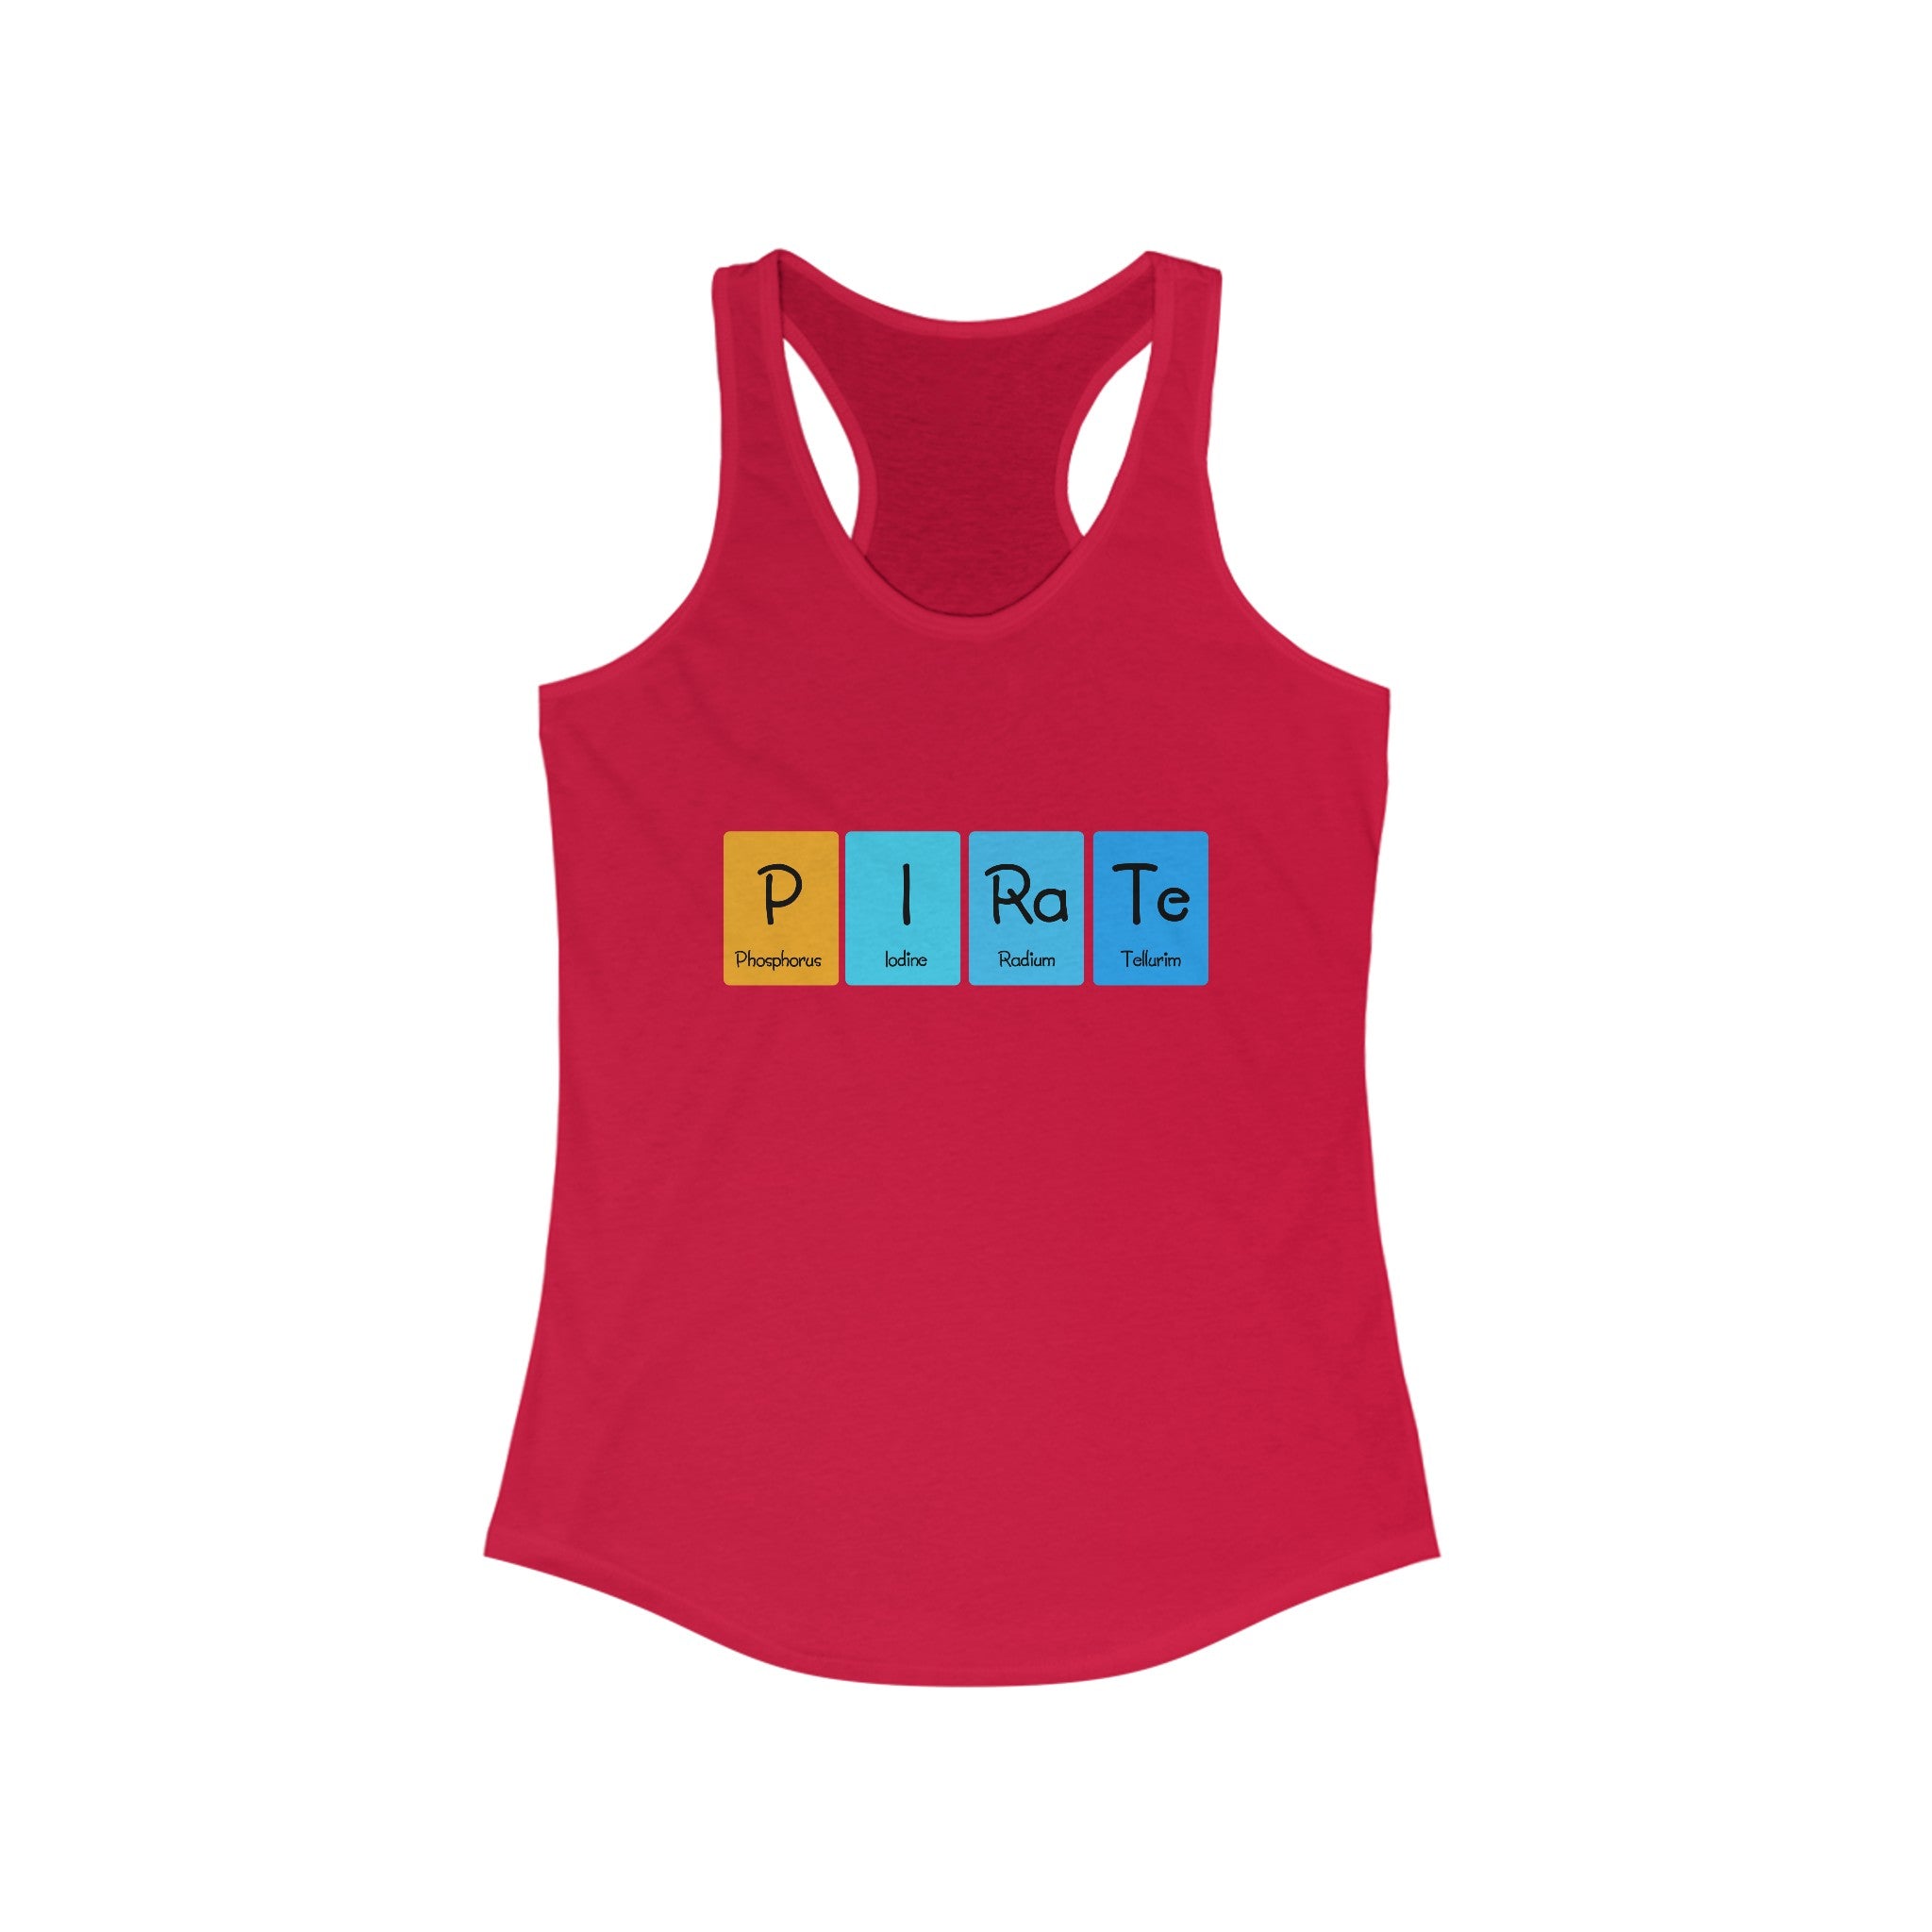 This P-I-Ra-Te - Women's Racerback Tank is perfect for an active lifestyle. It's a lightweight red top with "Pirate" spelled out in colored blocks, each featuring a different element: Phosphorus, Iodine, Radon, and Tellurium.